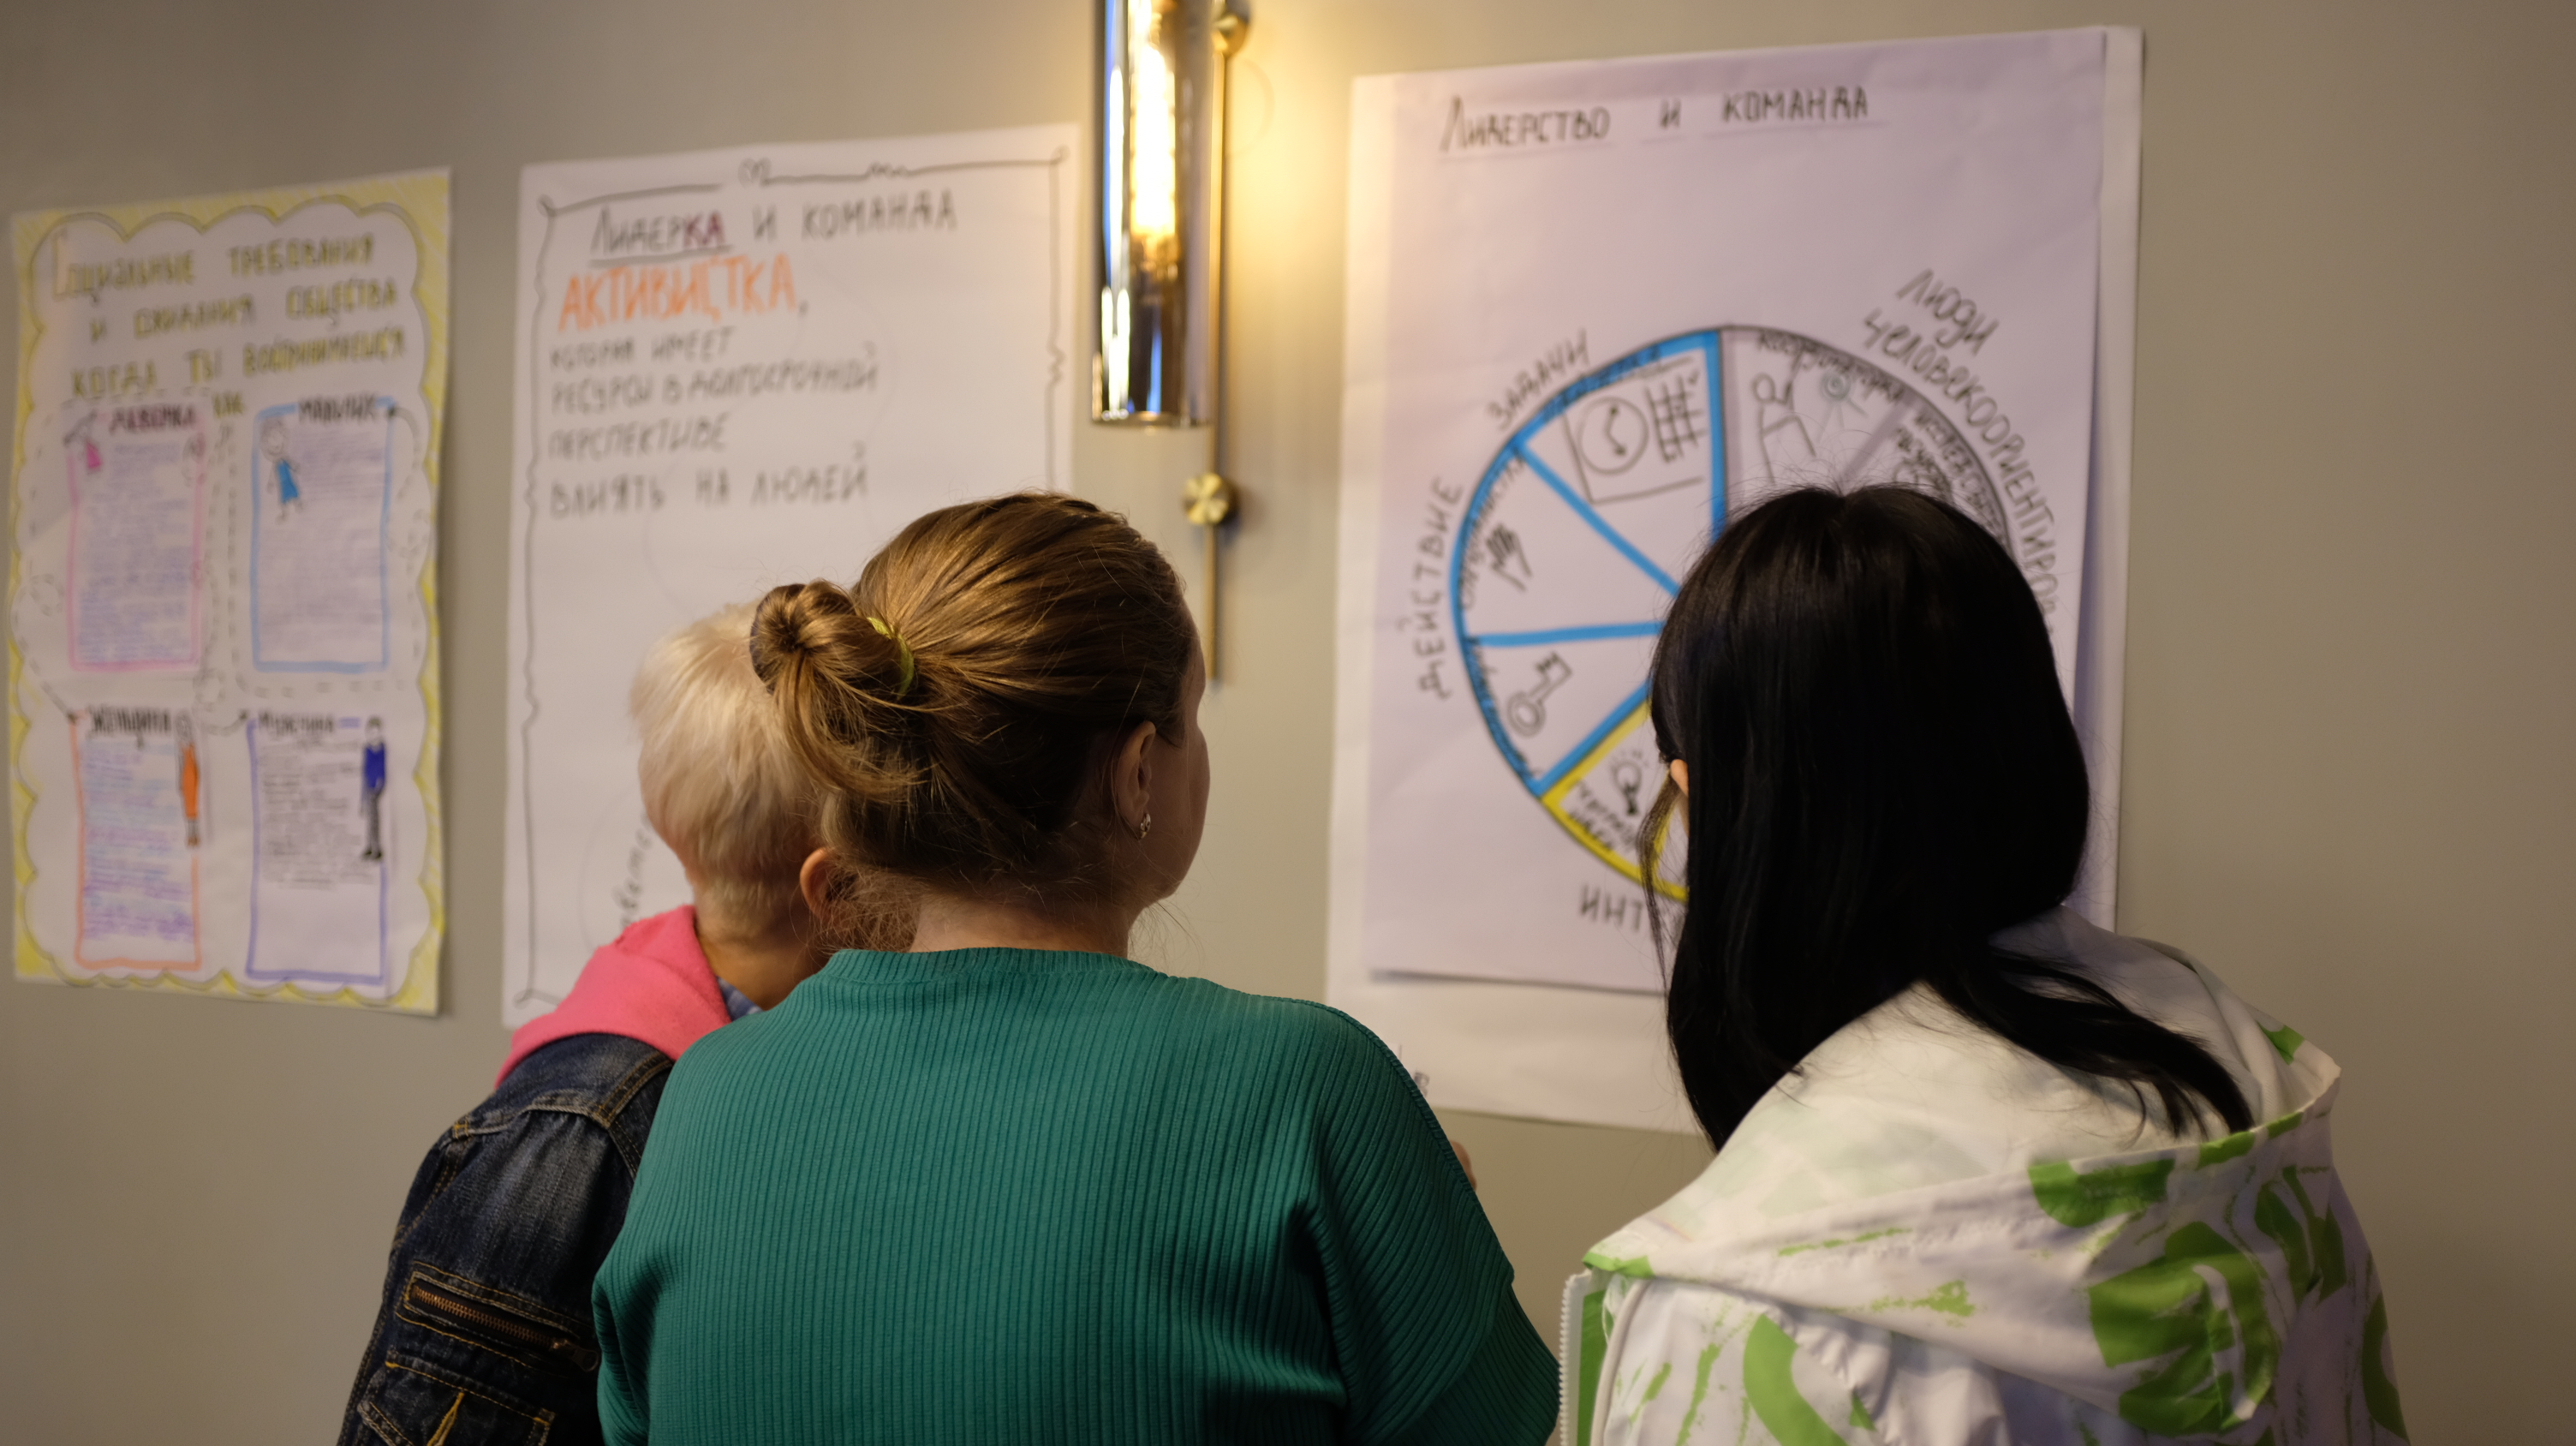 Participants of Leadership School gained knowledge and valuable insight on how to establish their own organizations and effectively develop partnerships among NGOs. Photo: UN Women Kazakhstan